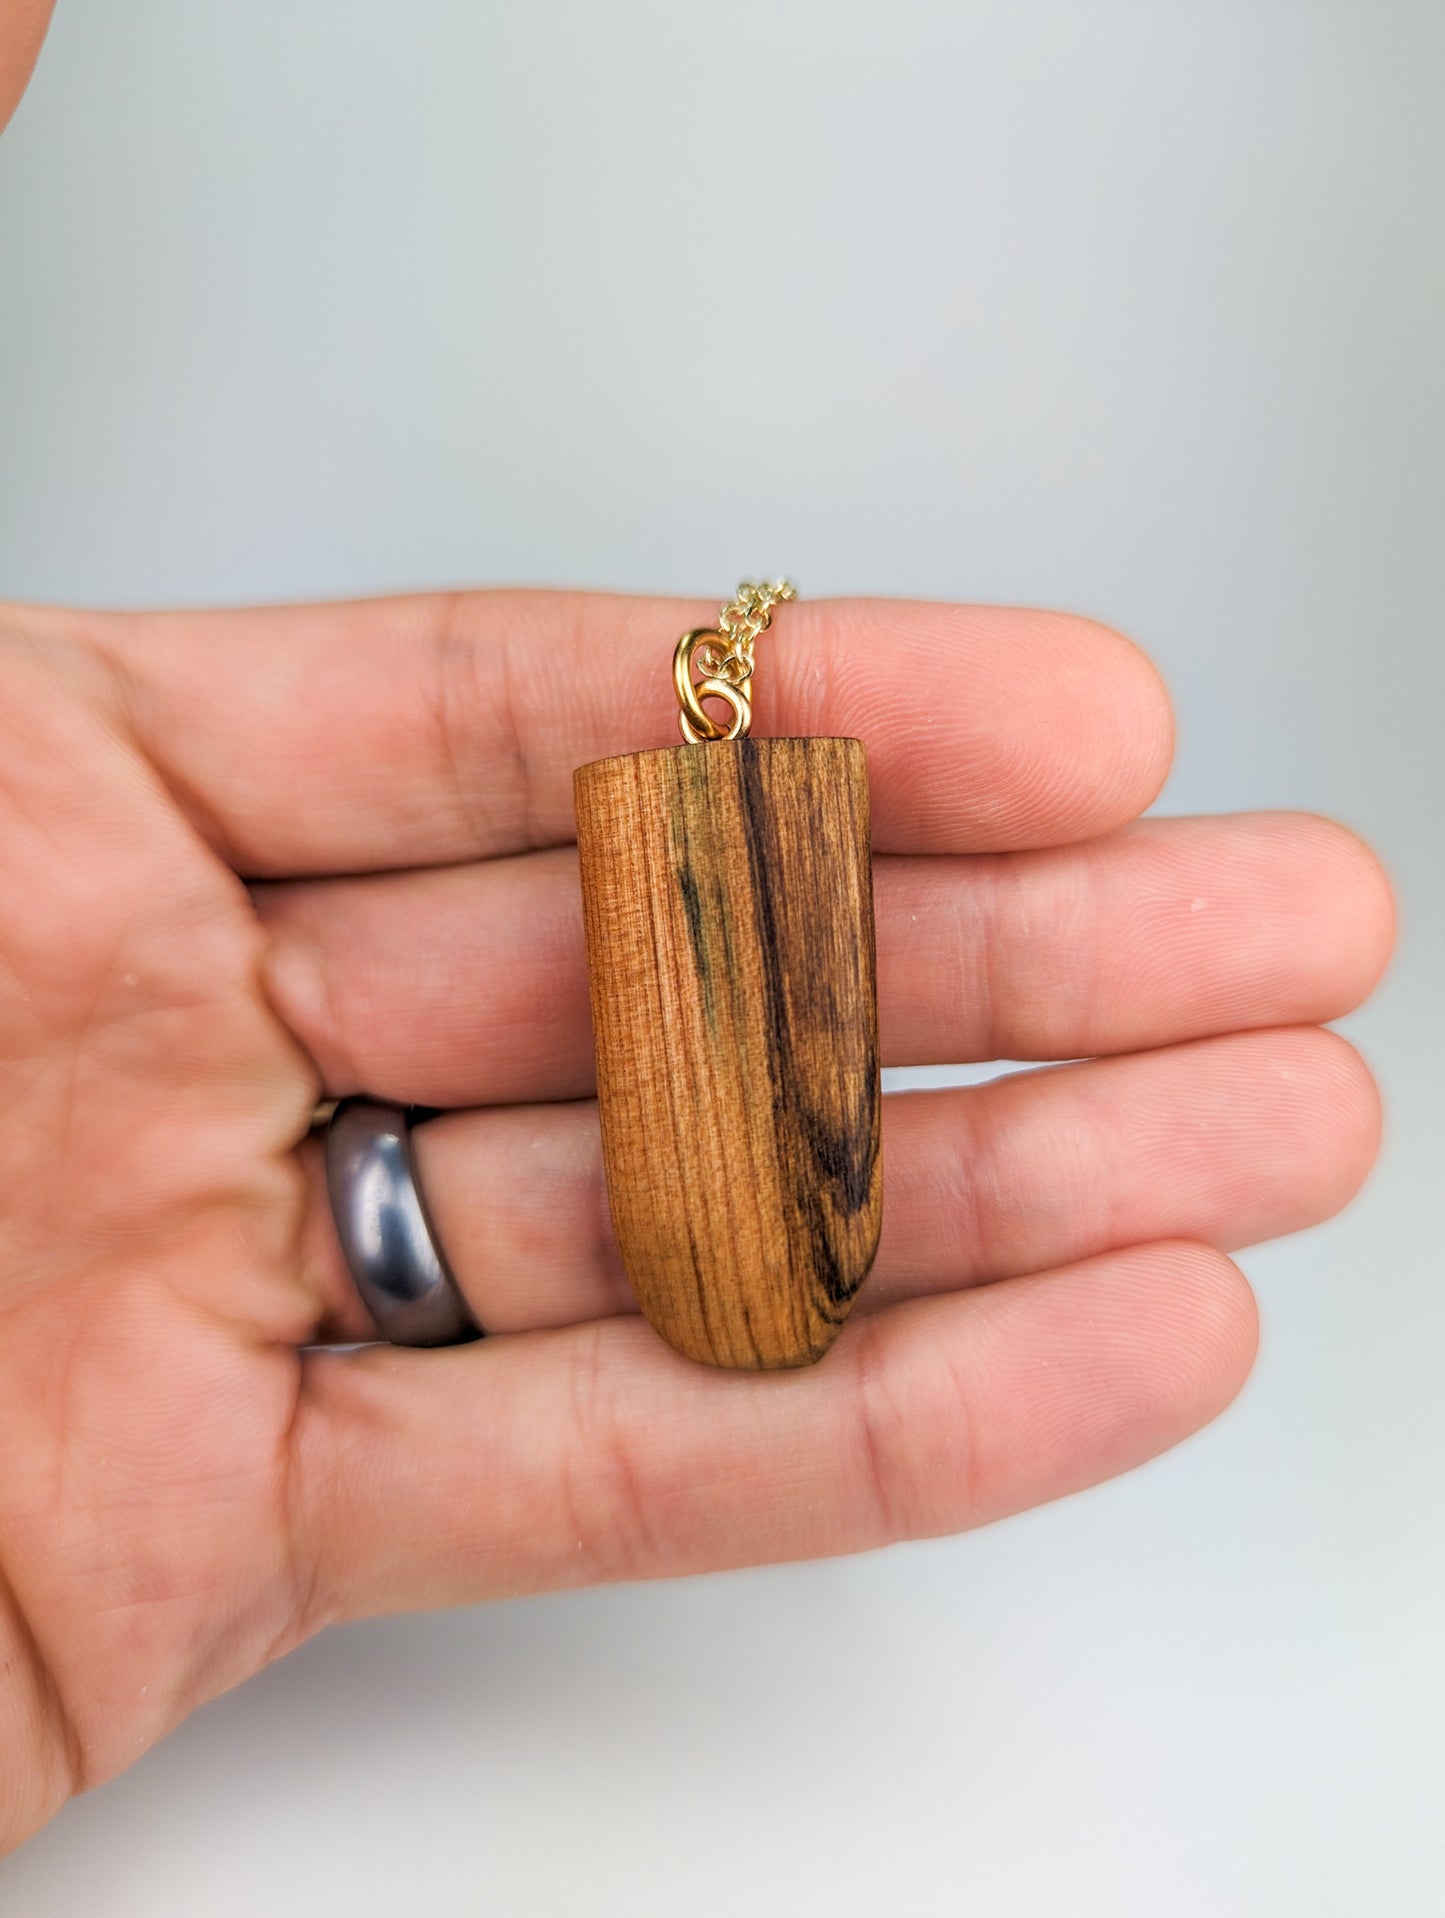 Naturally Fungus-Stained Wooden Pendant w/Black Spalting #2